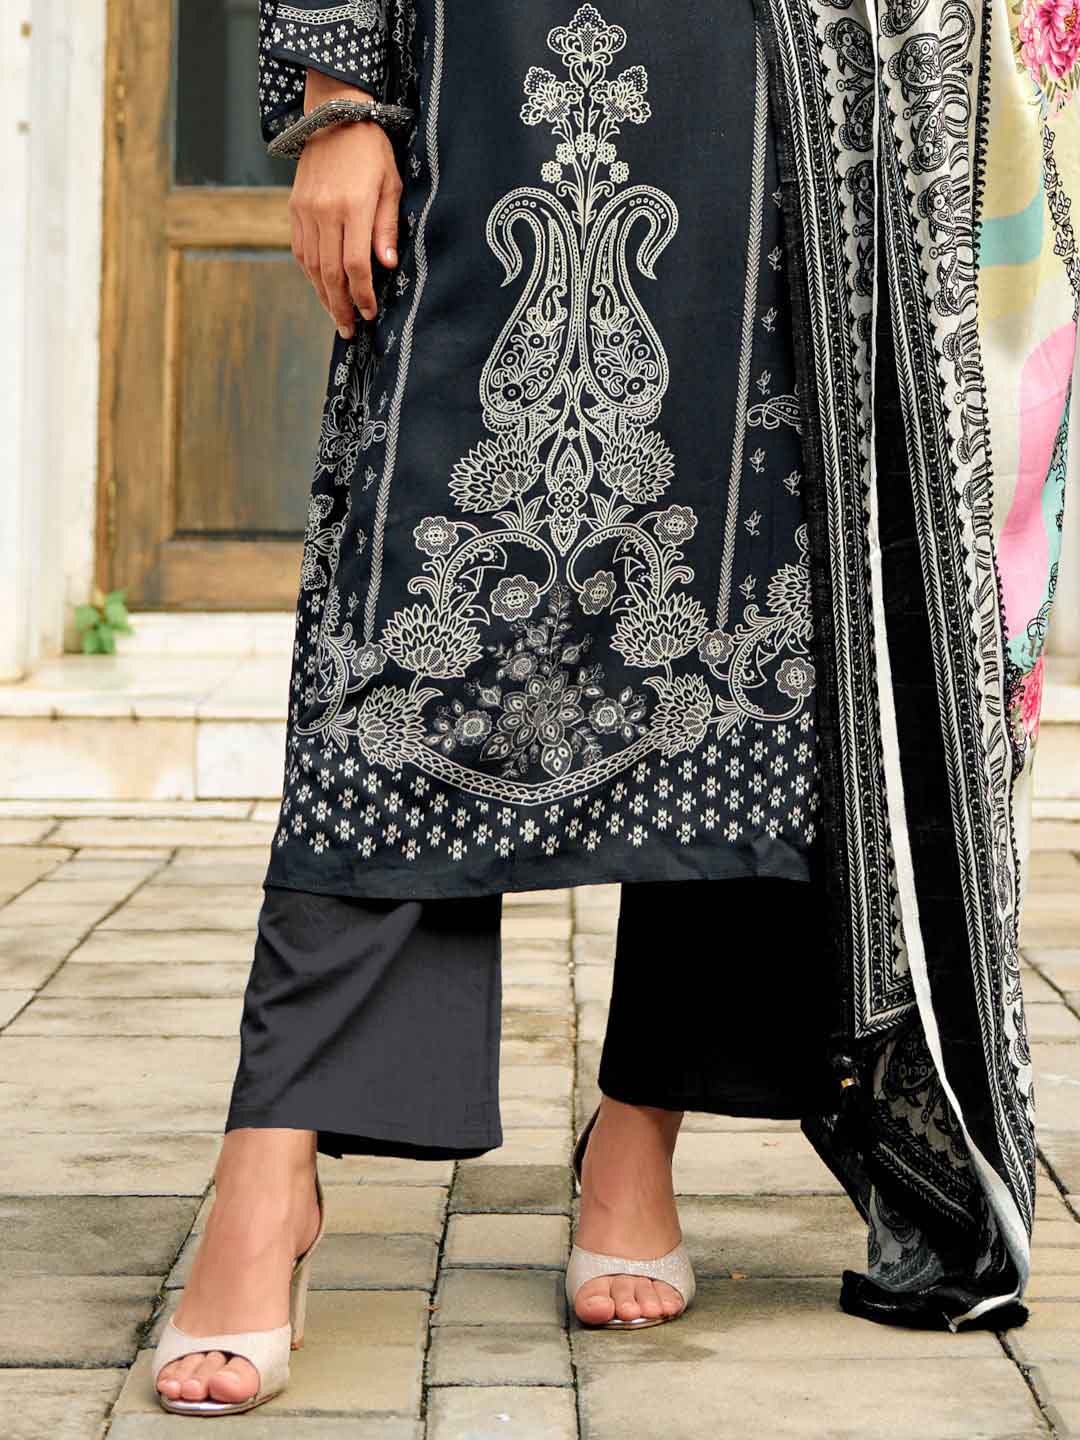 Woolen Unstitched Black Grey Winter Suit Dress Material with Zari Work Rang Fashion